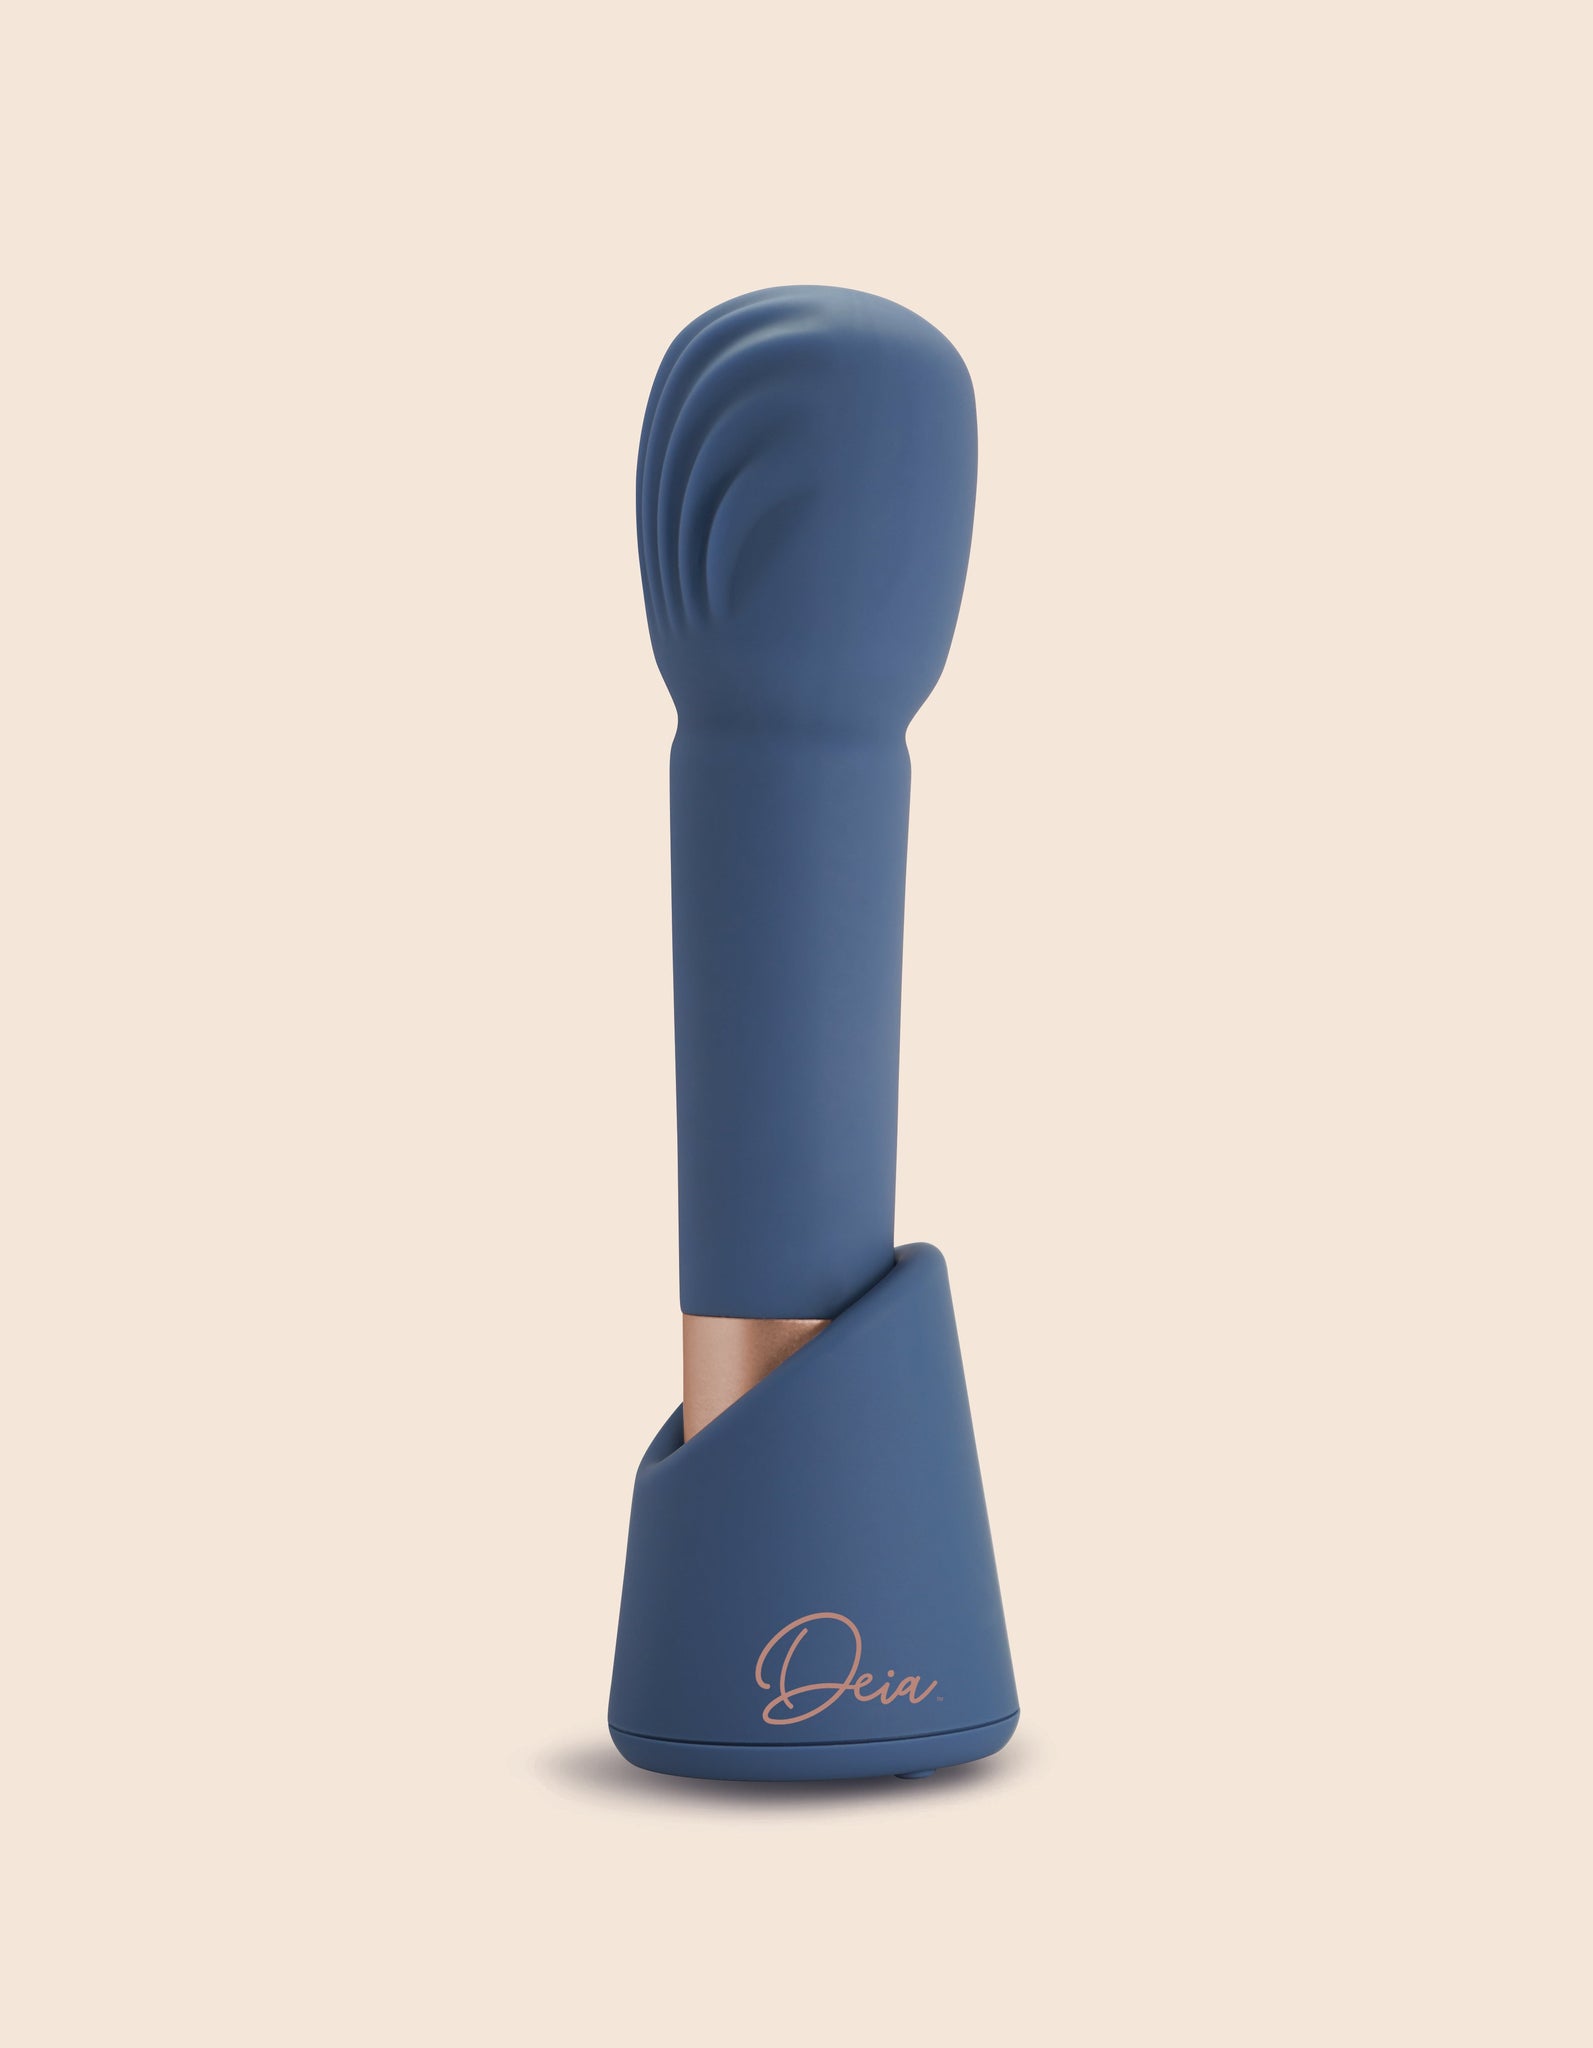 The Wand by Diea-shown in a vertical close up position in stand